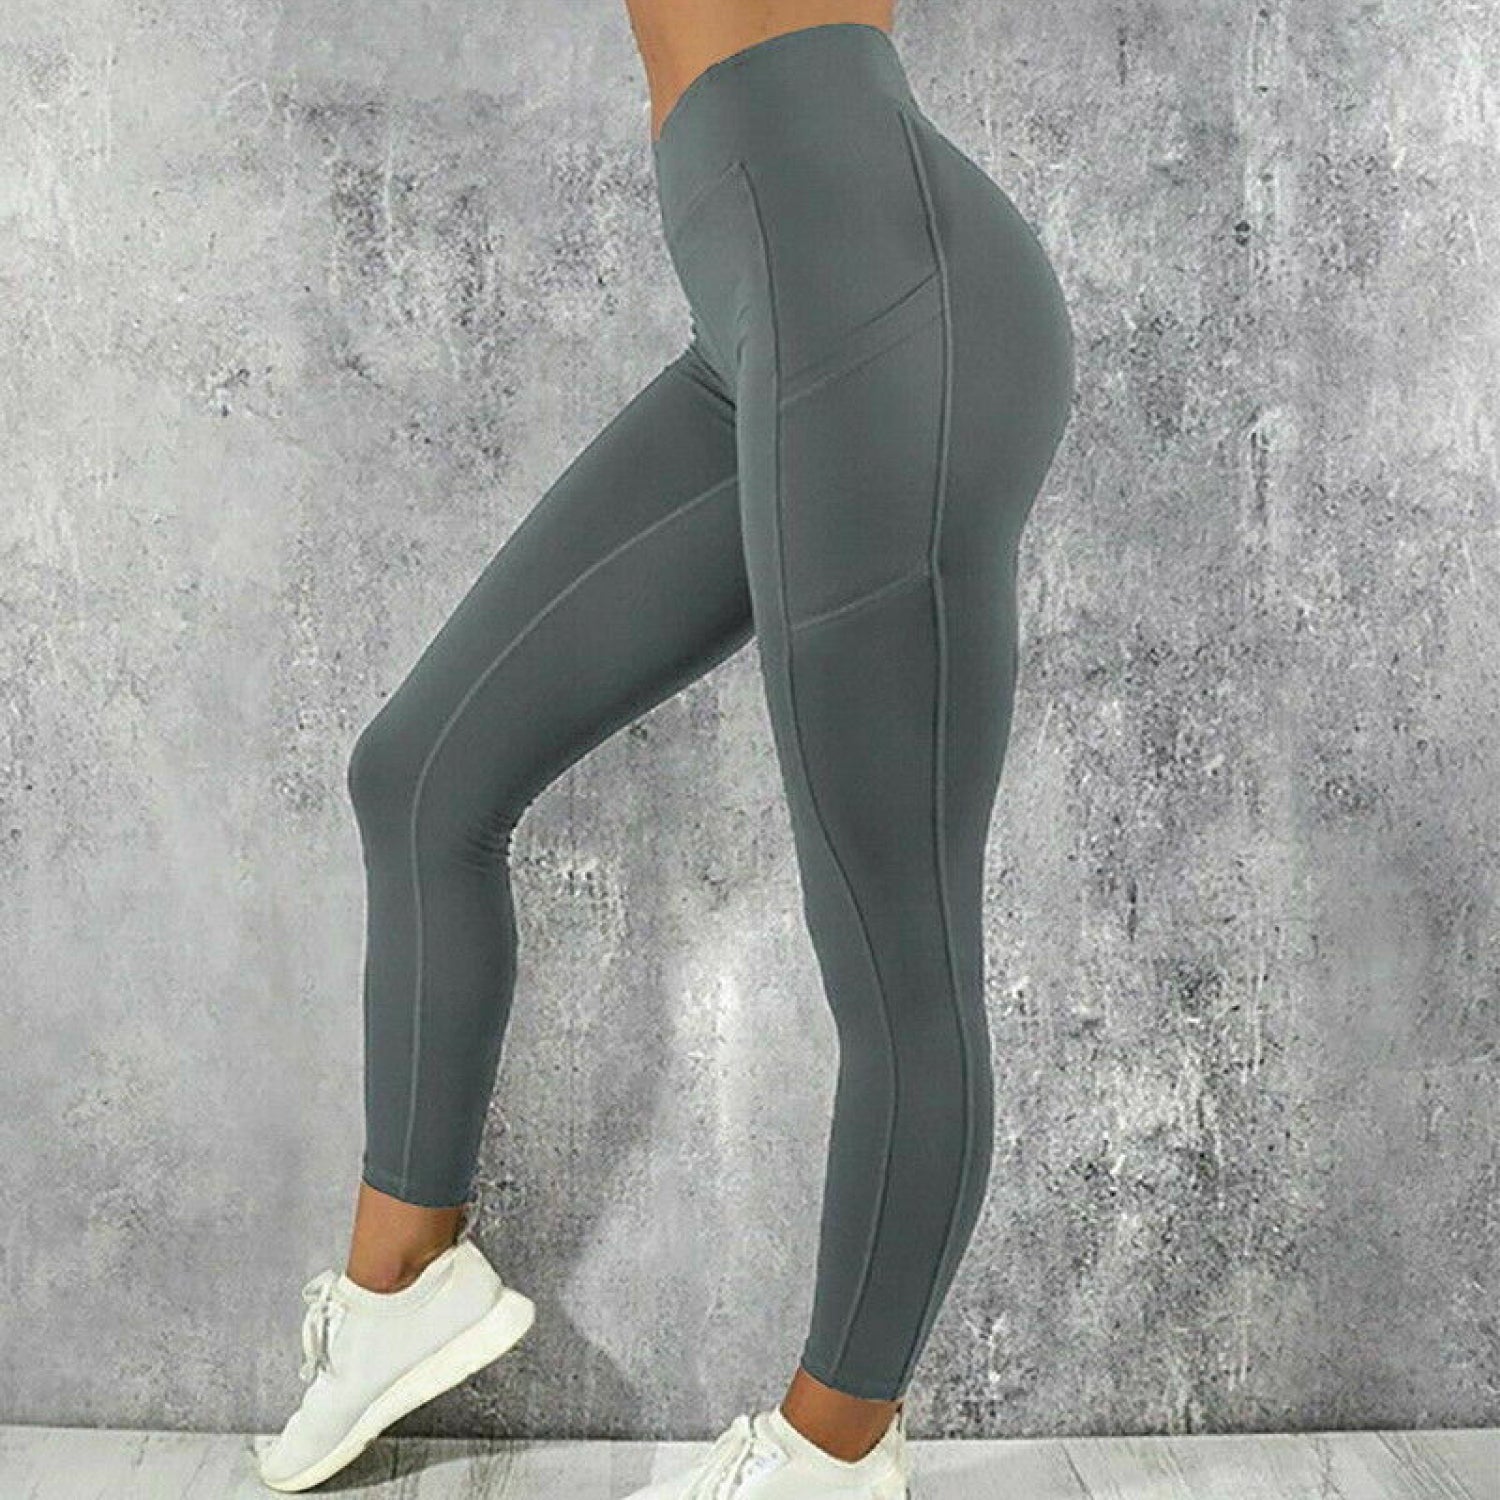 Workout Leggings for Women - Sports & Gym Clothes Ideal for Running, General Fitness Wear and Yoga w/Hidden Pocket Design